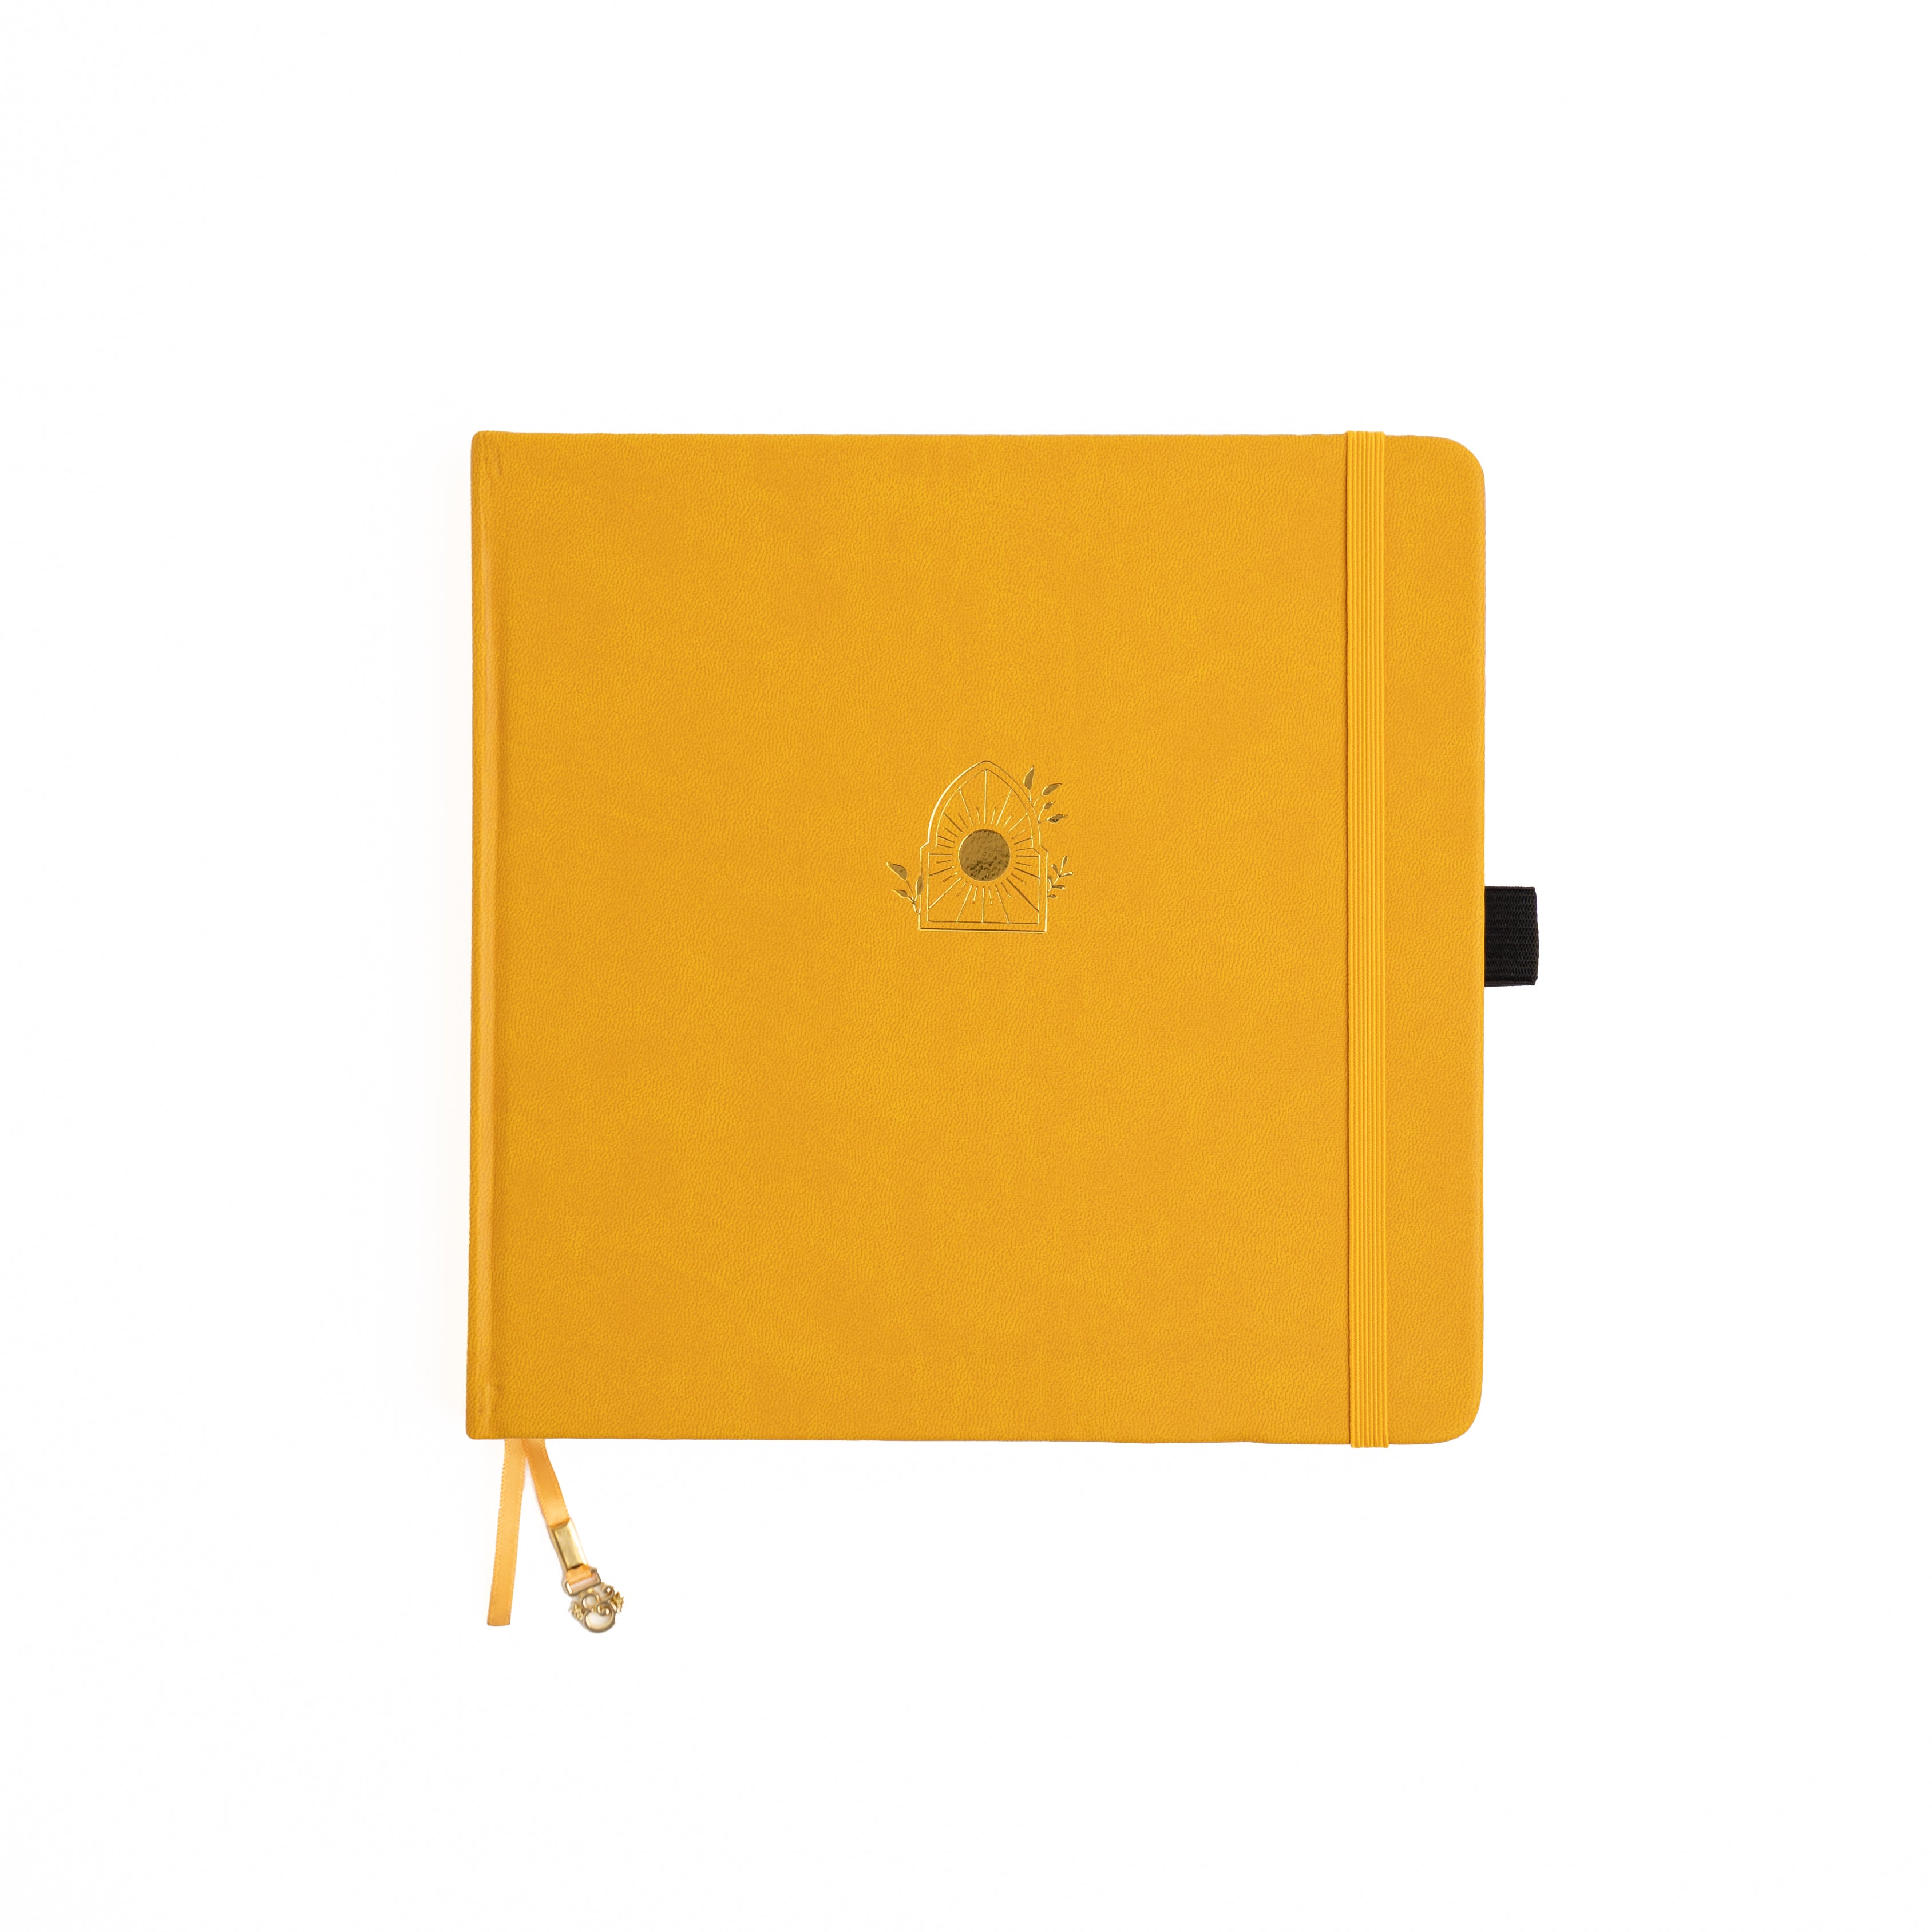 Sun Frame Dot Grid Notebook by Archer and Olive